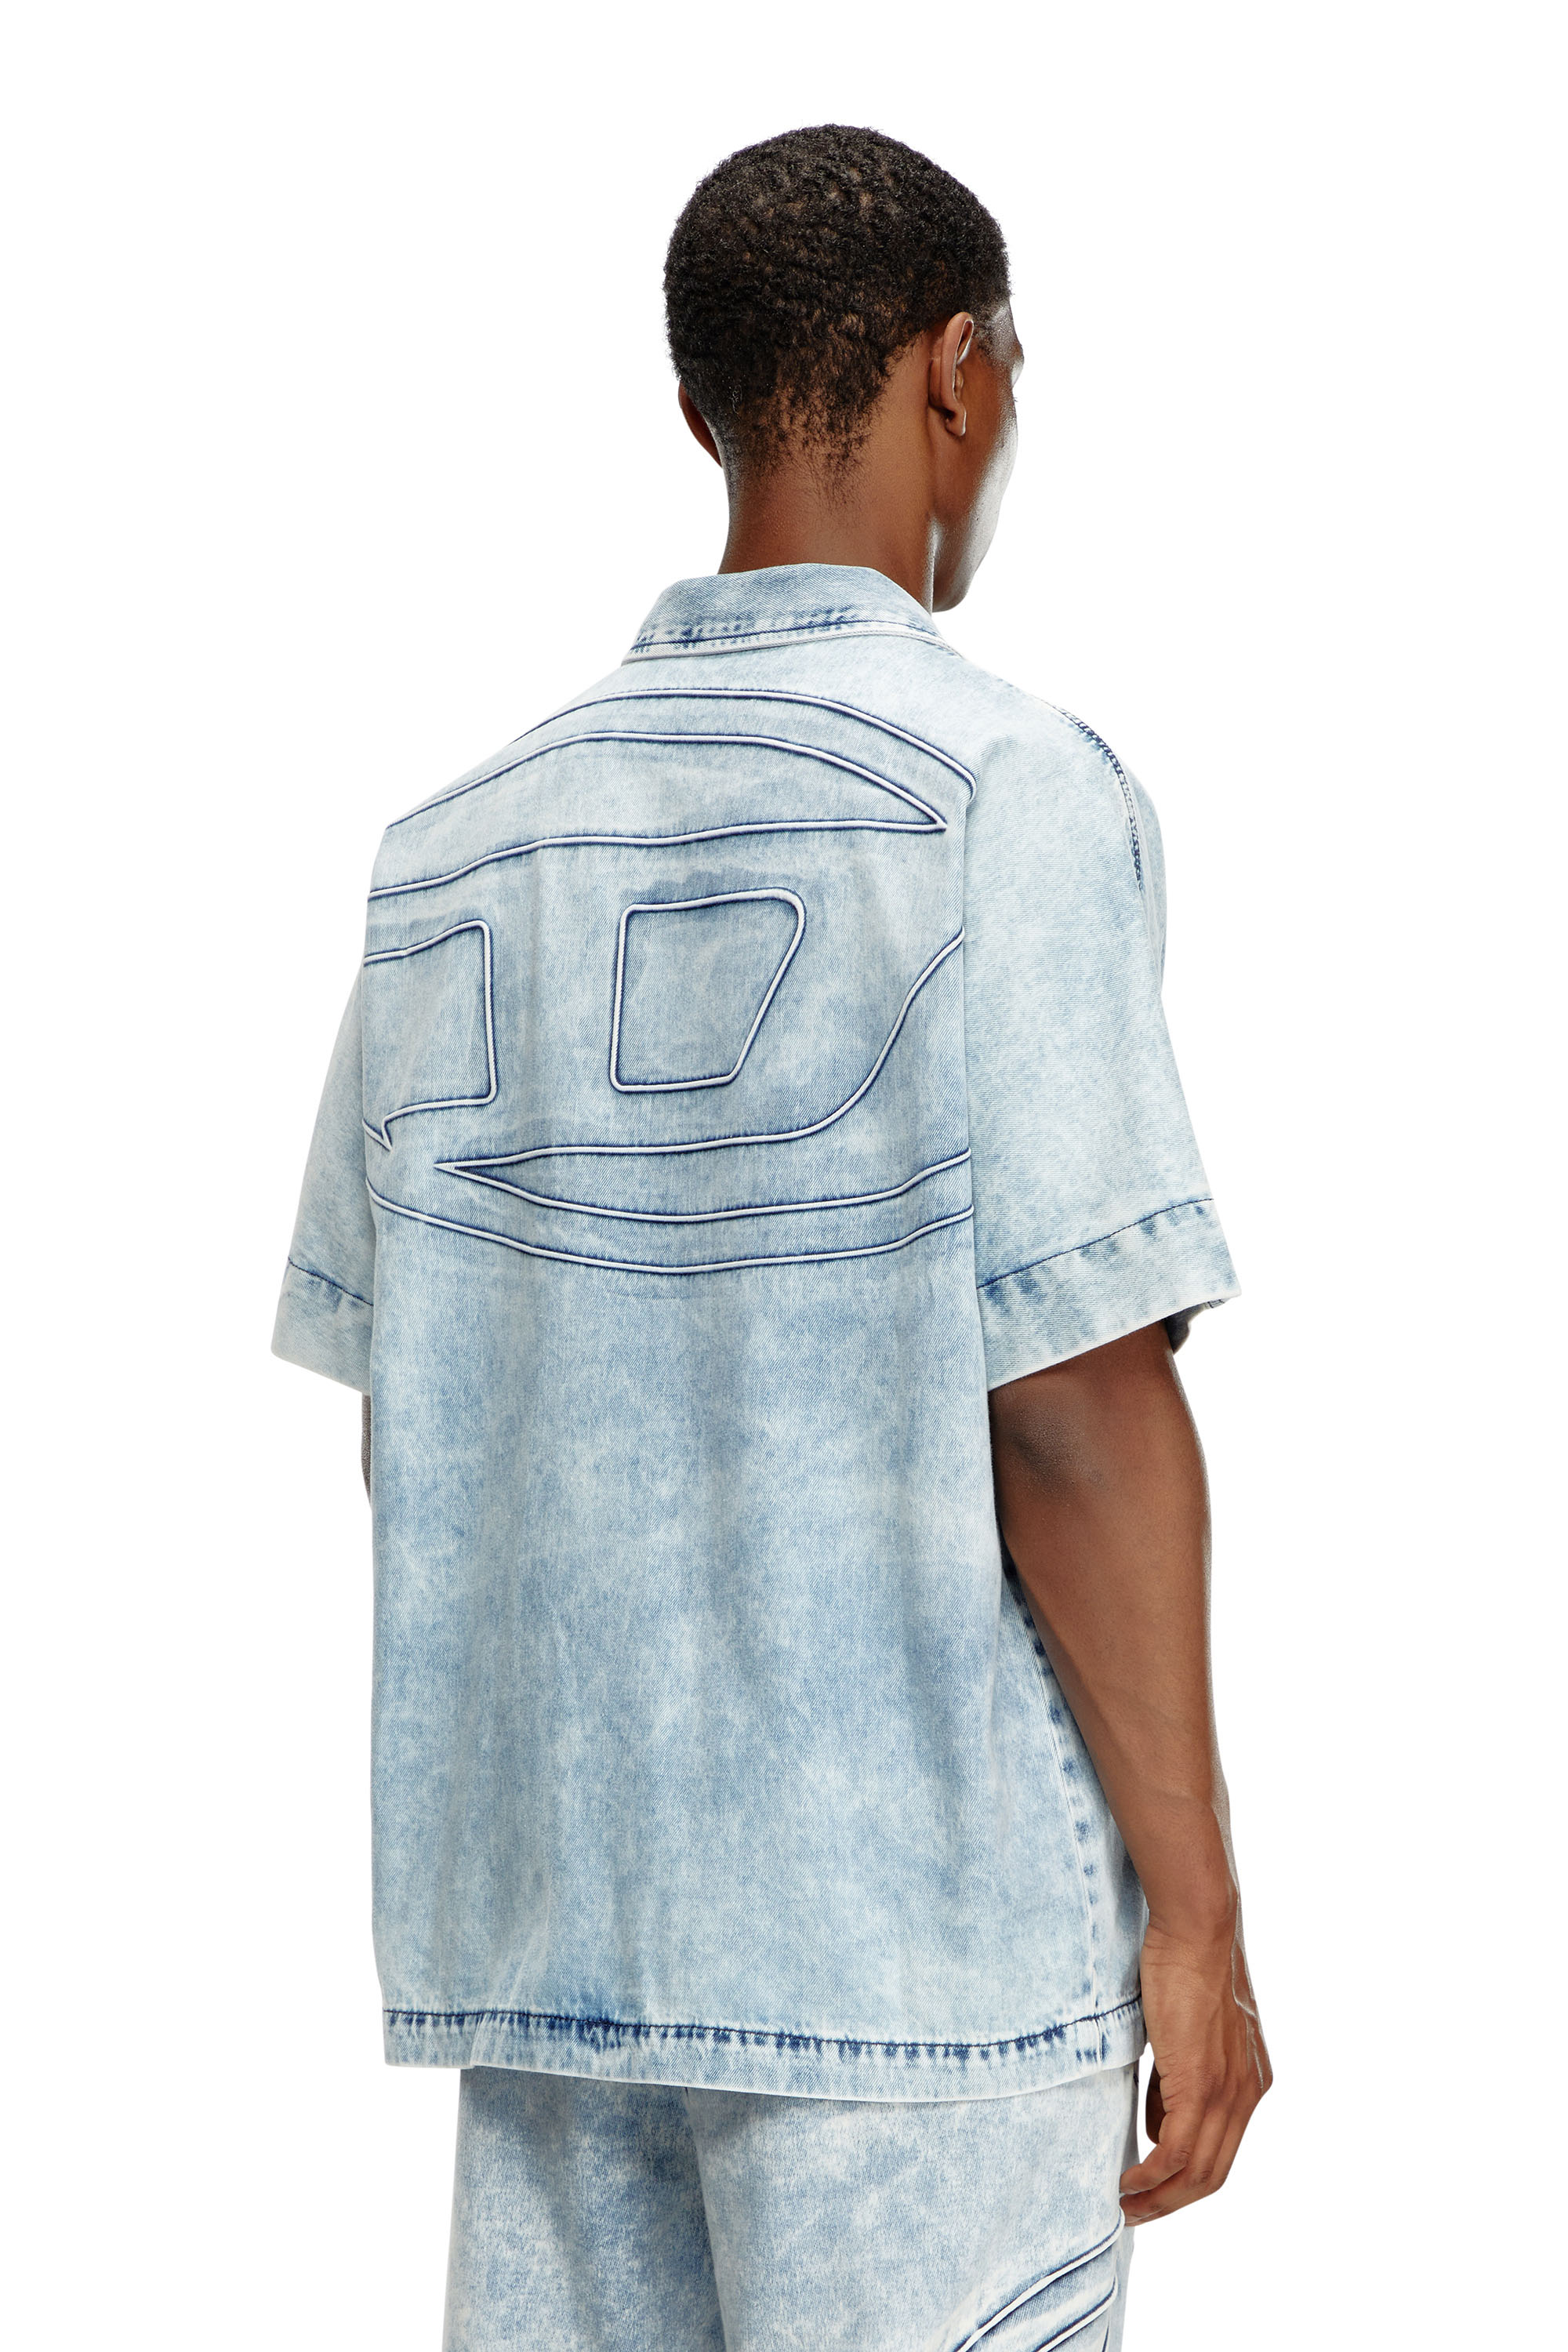 Diesel - D-NABIL-S, Male Denim bowling shirt with Oval D in ブルー - Image 1